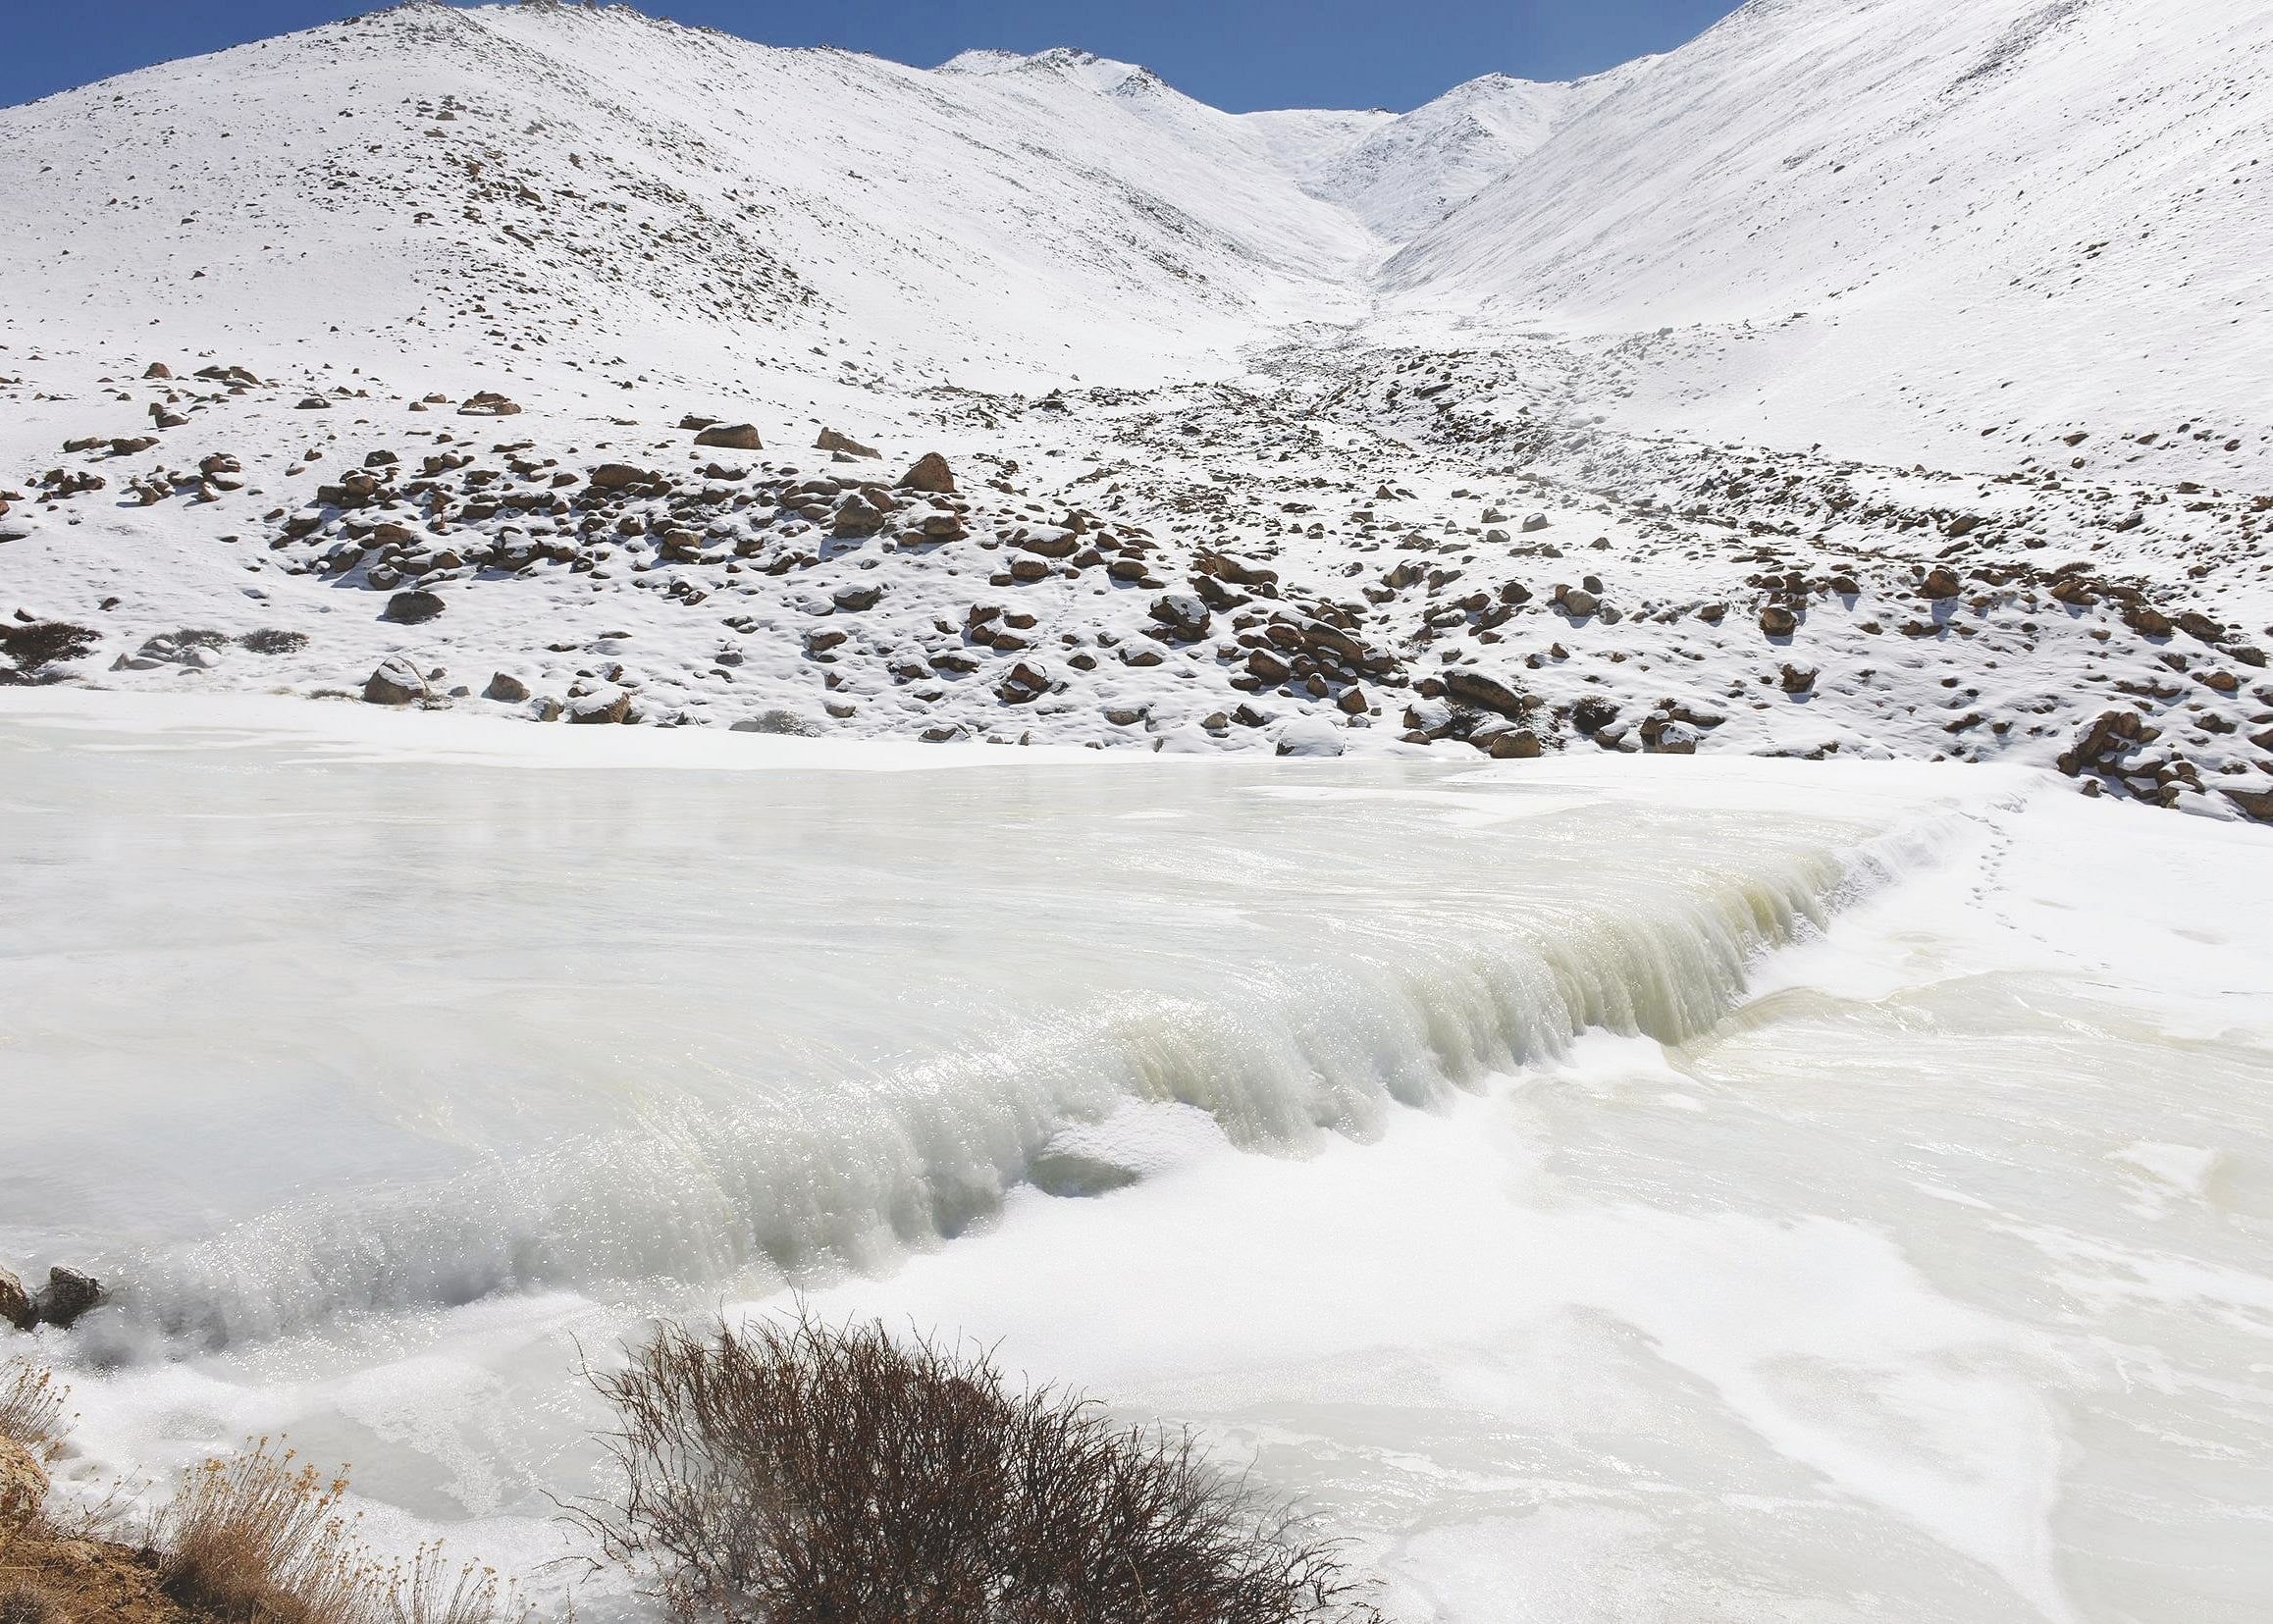 ladakh is future-proofing against climate change with ice stupas—less snow, melting glaciers